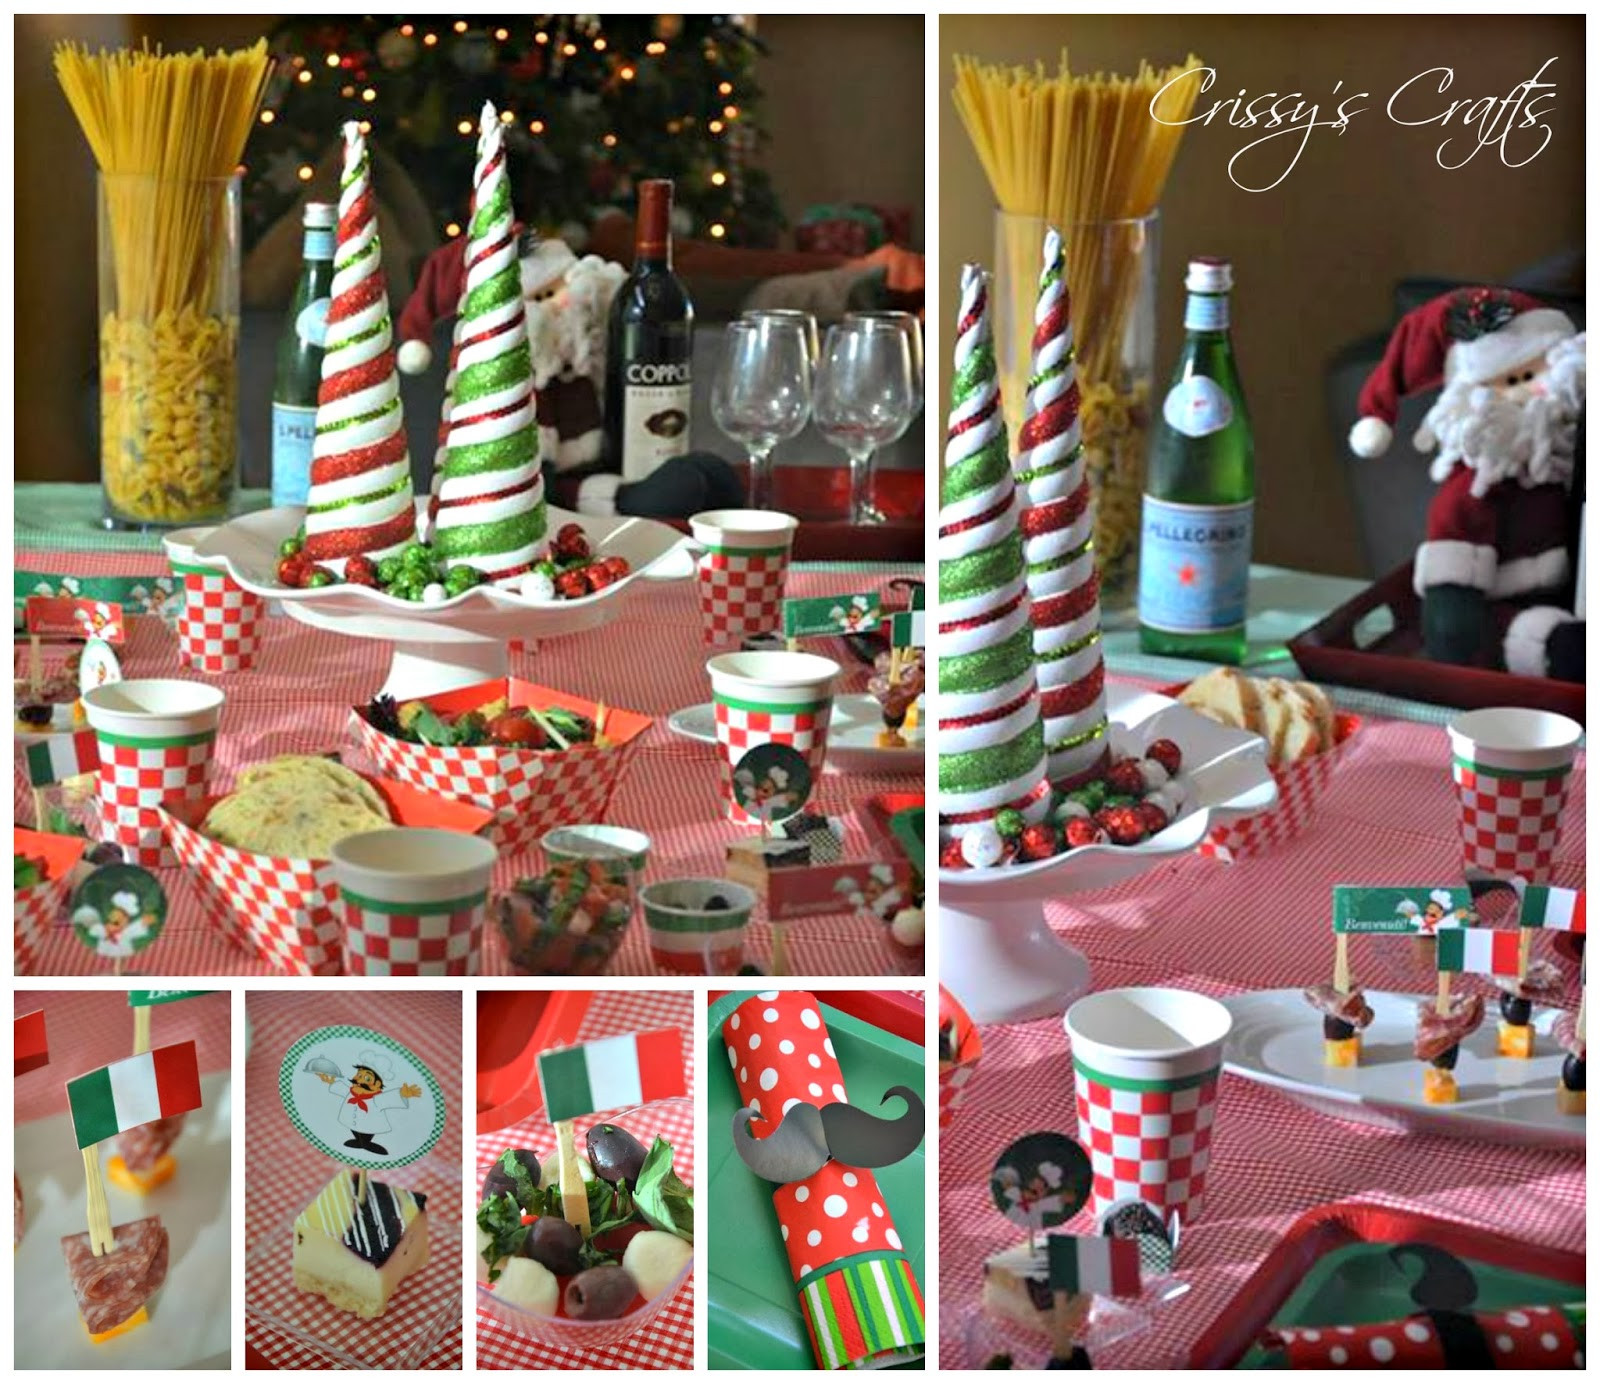 Christmas Dinner Party Theme Ideas
 Crissy s Crafts December 2013